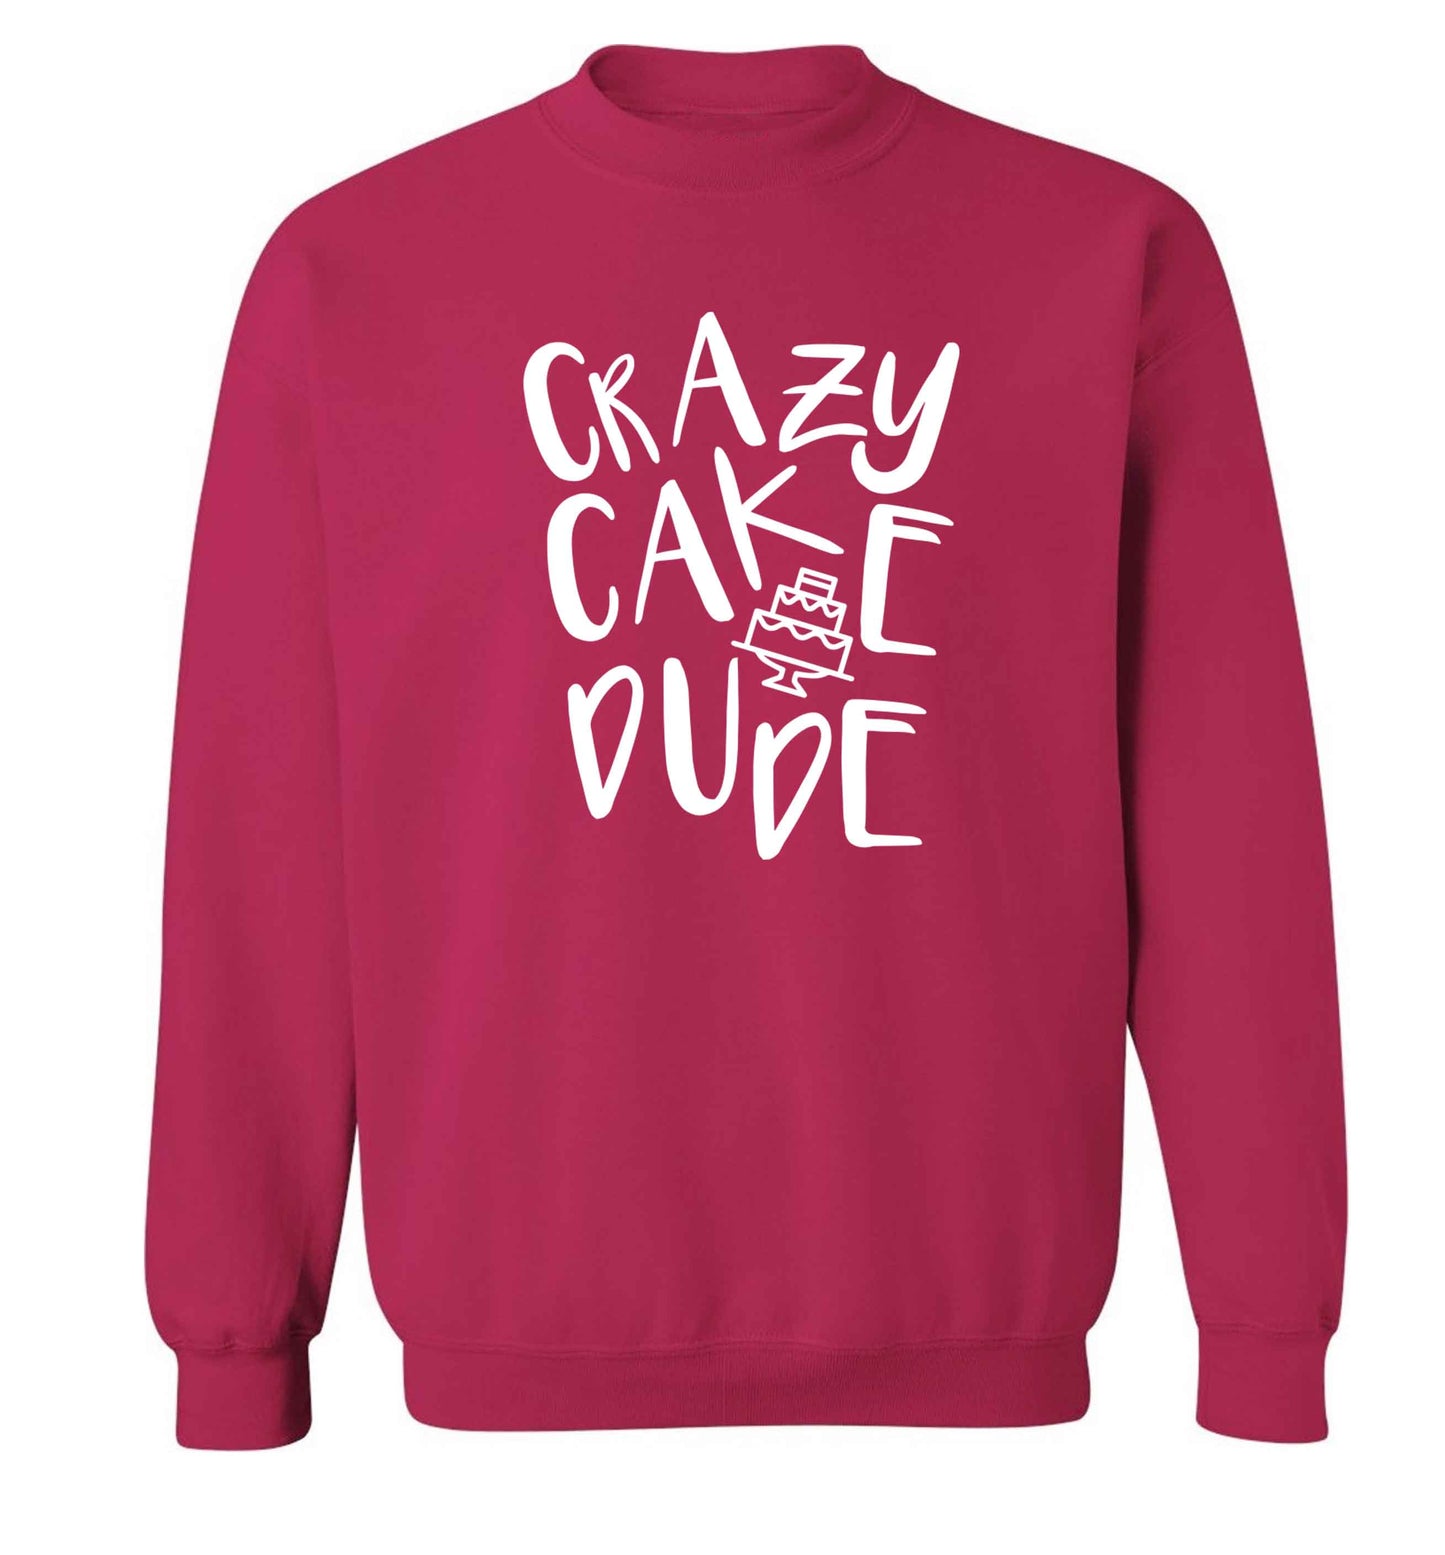 Crazy cake dude Adult's unisex pink Sweater 2XL